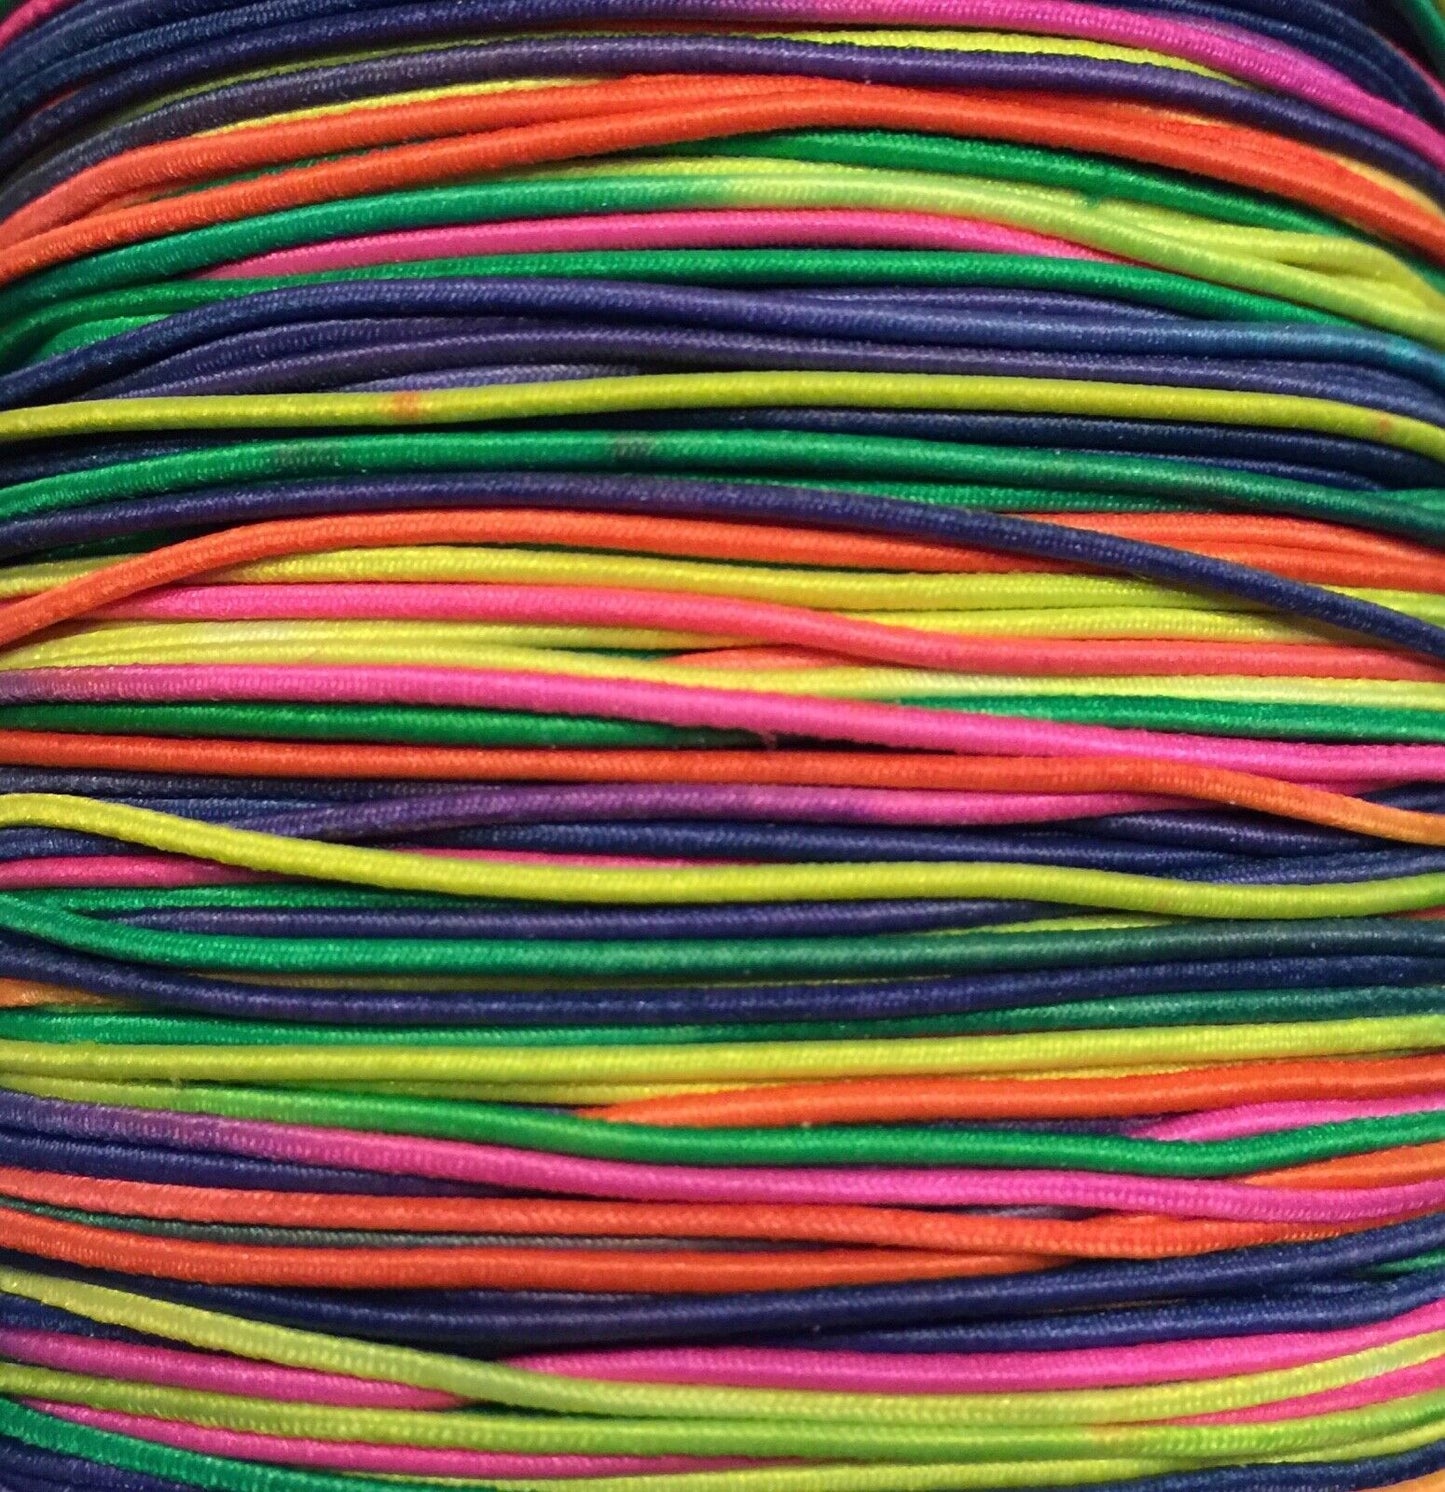 10x Yards 1mm Elastic Beading Crafting Cord - Pick your colour